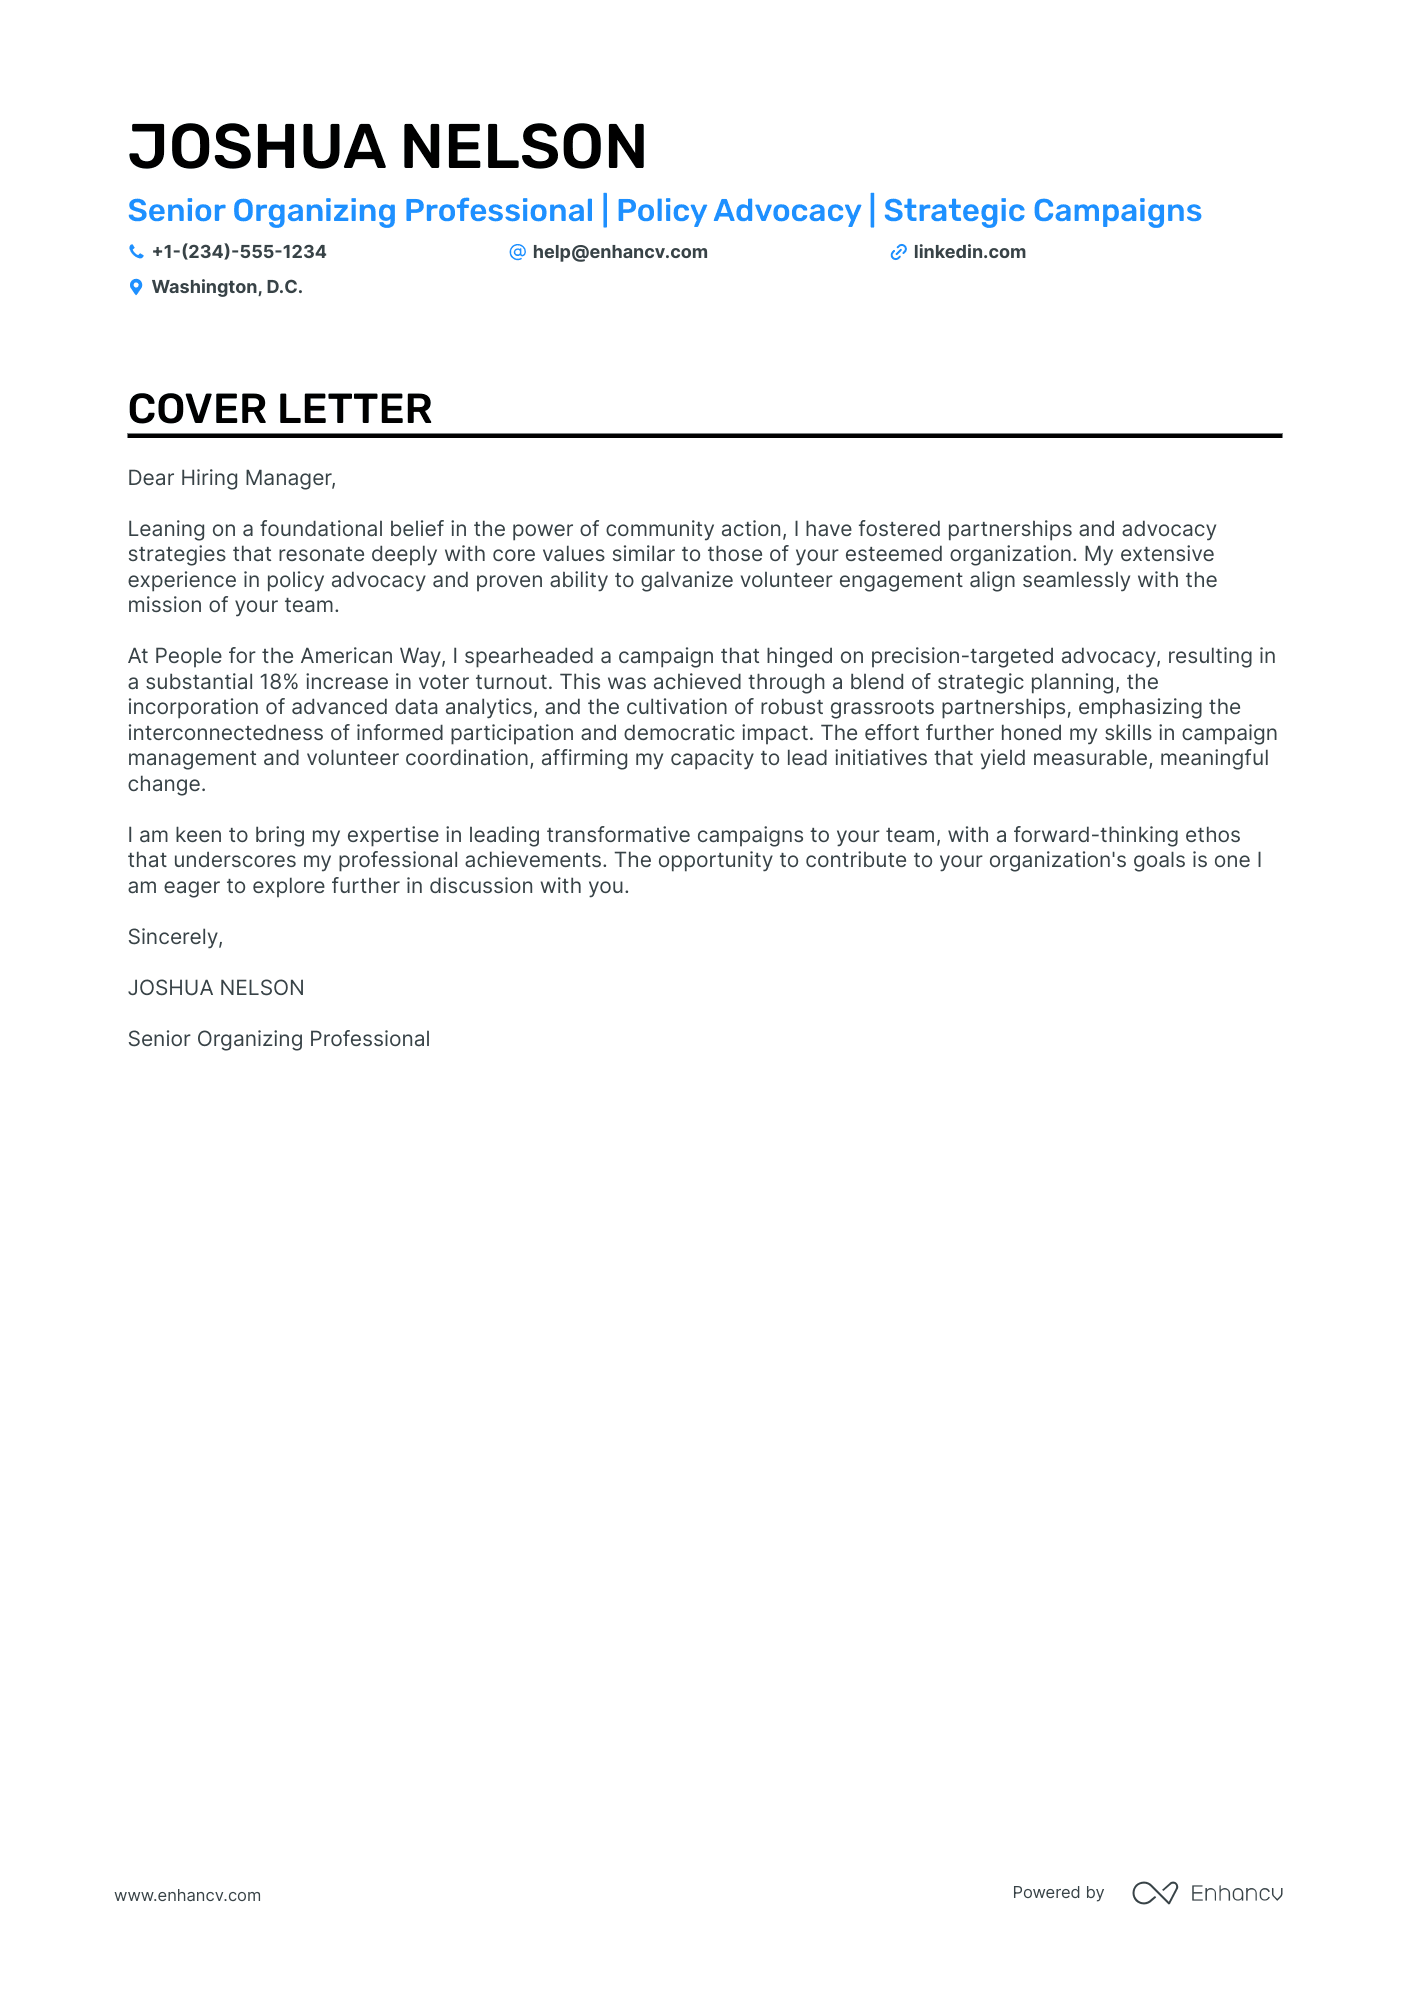 Phone Banking cover letter